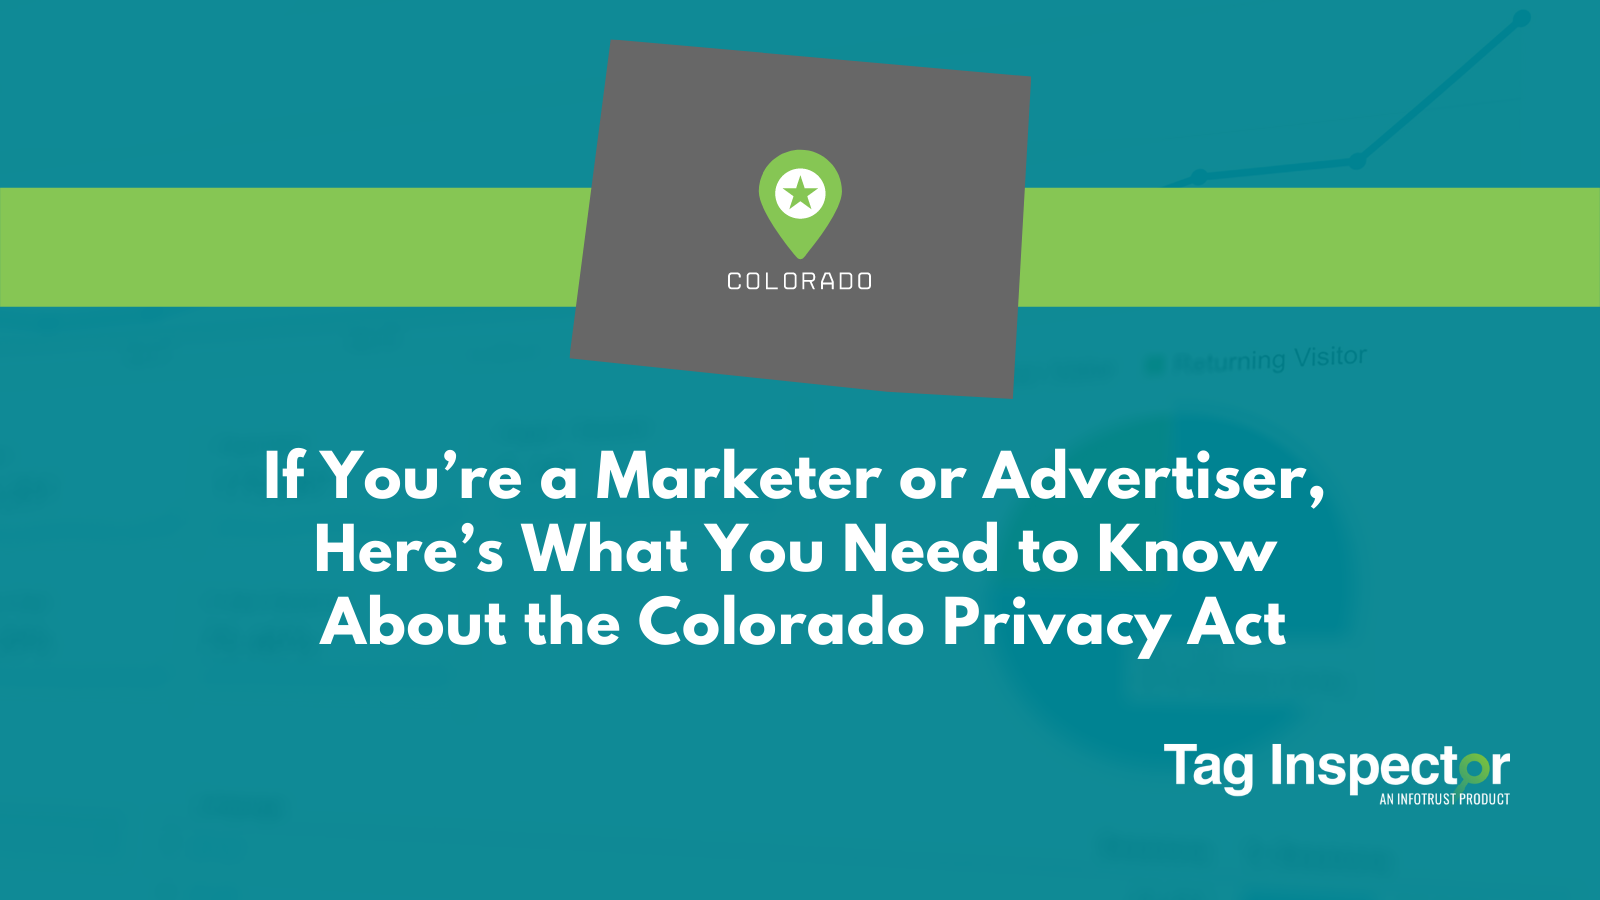 If You’re a Marketer or Advertiser, Here’s What You Need to Know About the Colorado Privacy Act